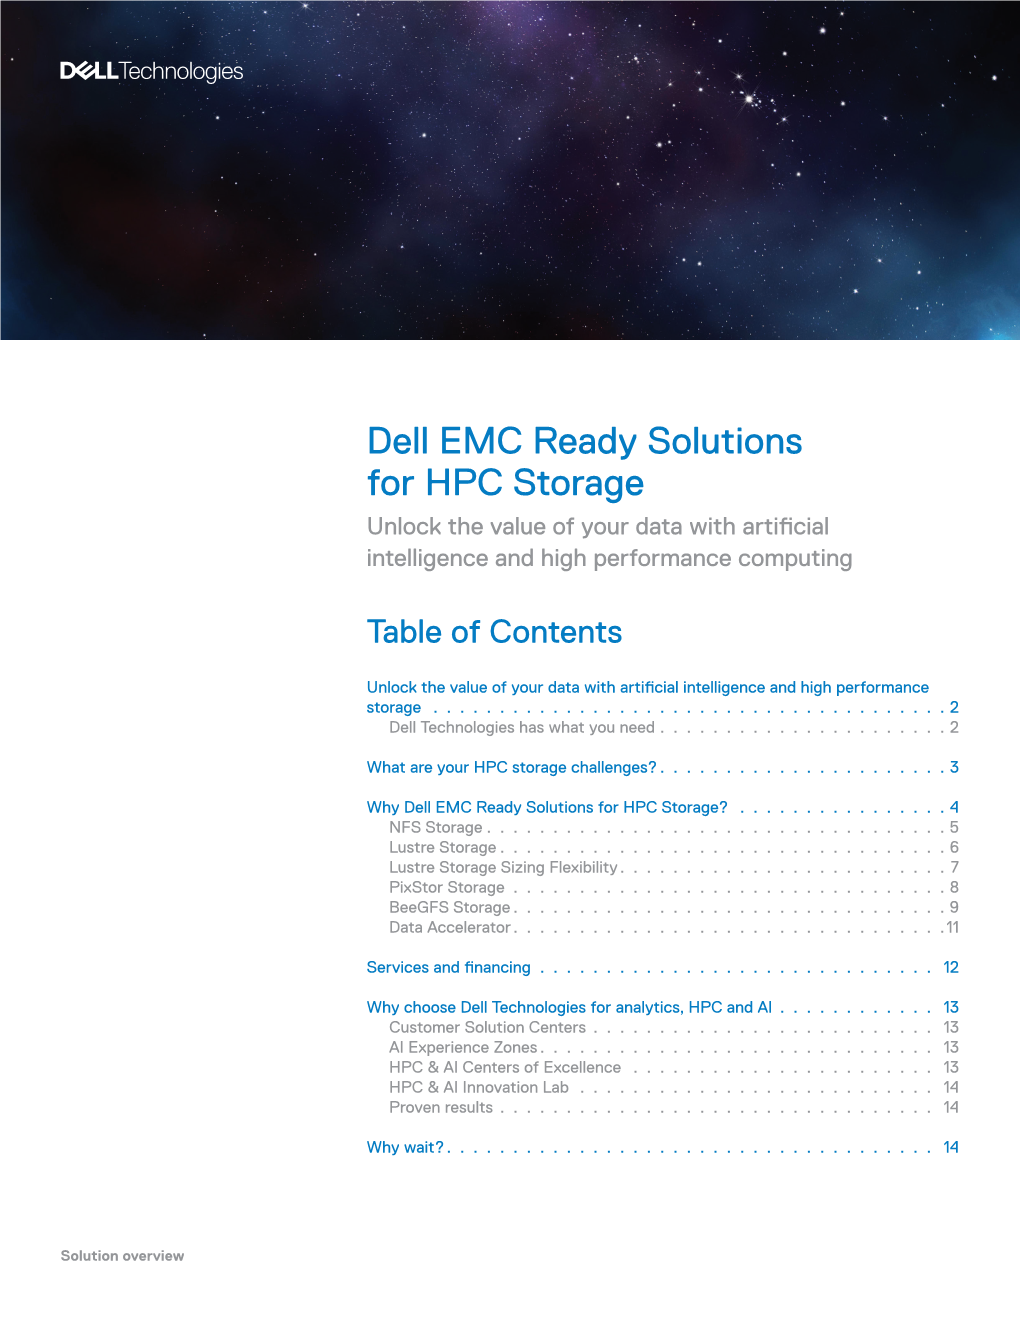 Dell EMC Ready Solutions for HPC Storage Unlock the Value of Your Data with Artificial Intelligence and High Performance Computing